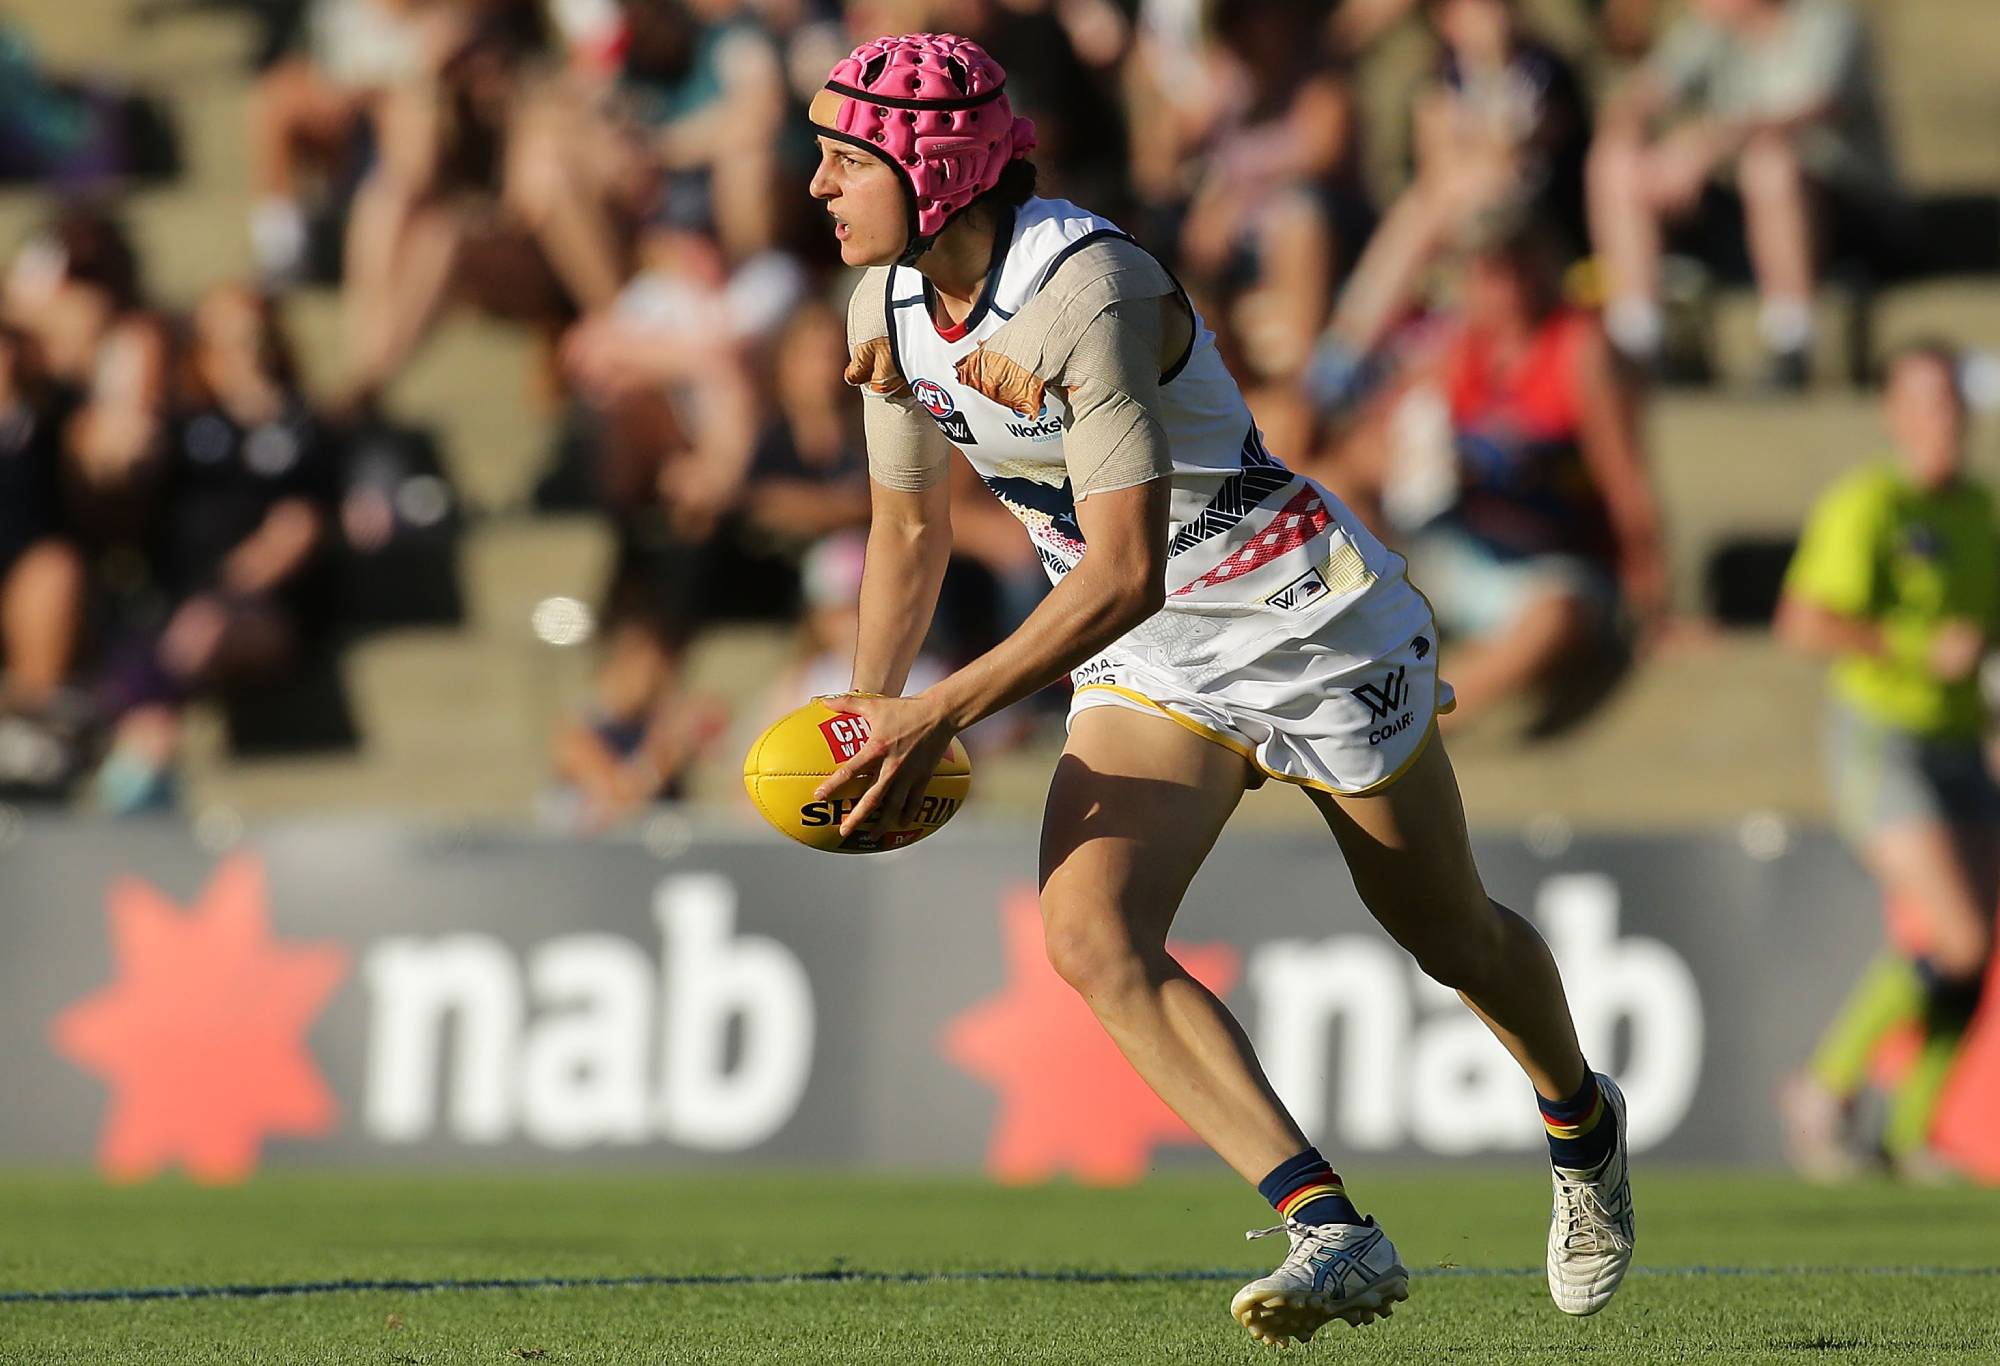 FREMANTLE, WESTERN AUSTRALIA - FEBRUARY 26: Heather Anderson of the Crows looks to pass the ball during the round four AFL Women's match between the Fremantle Dockers and the Adelaide Crows at Fremantle Oval on February 26, 2017 in Fremantle, Australia.  (Photo by Will Russell/AFL Media/Getty Images)